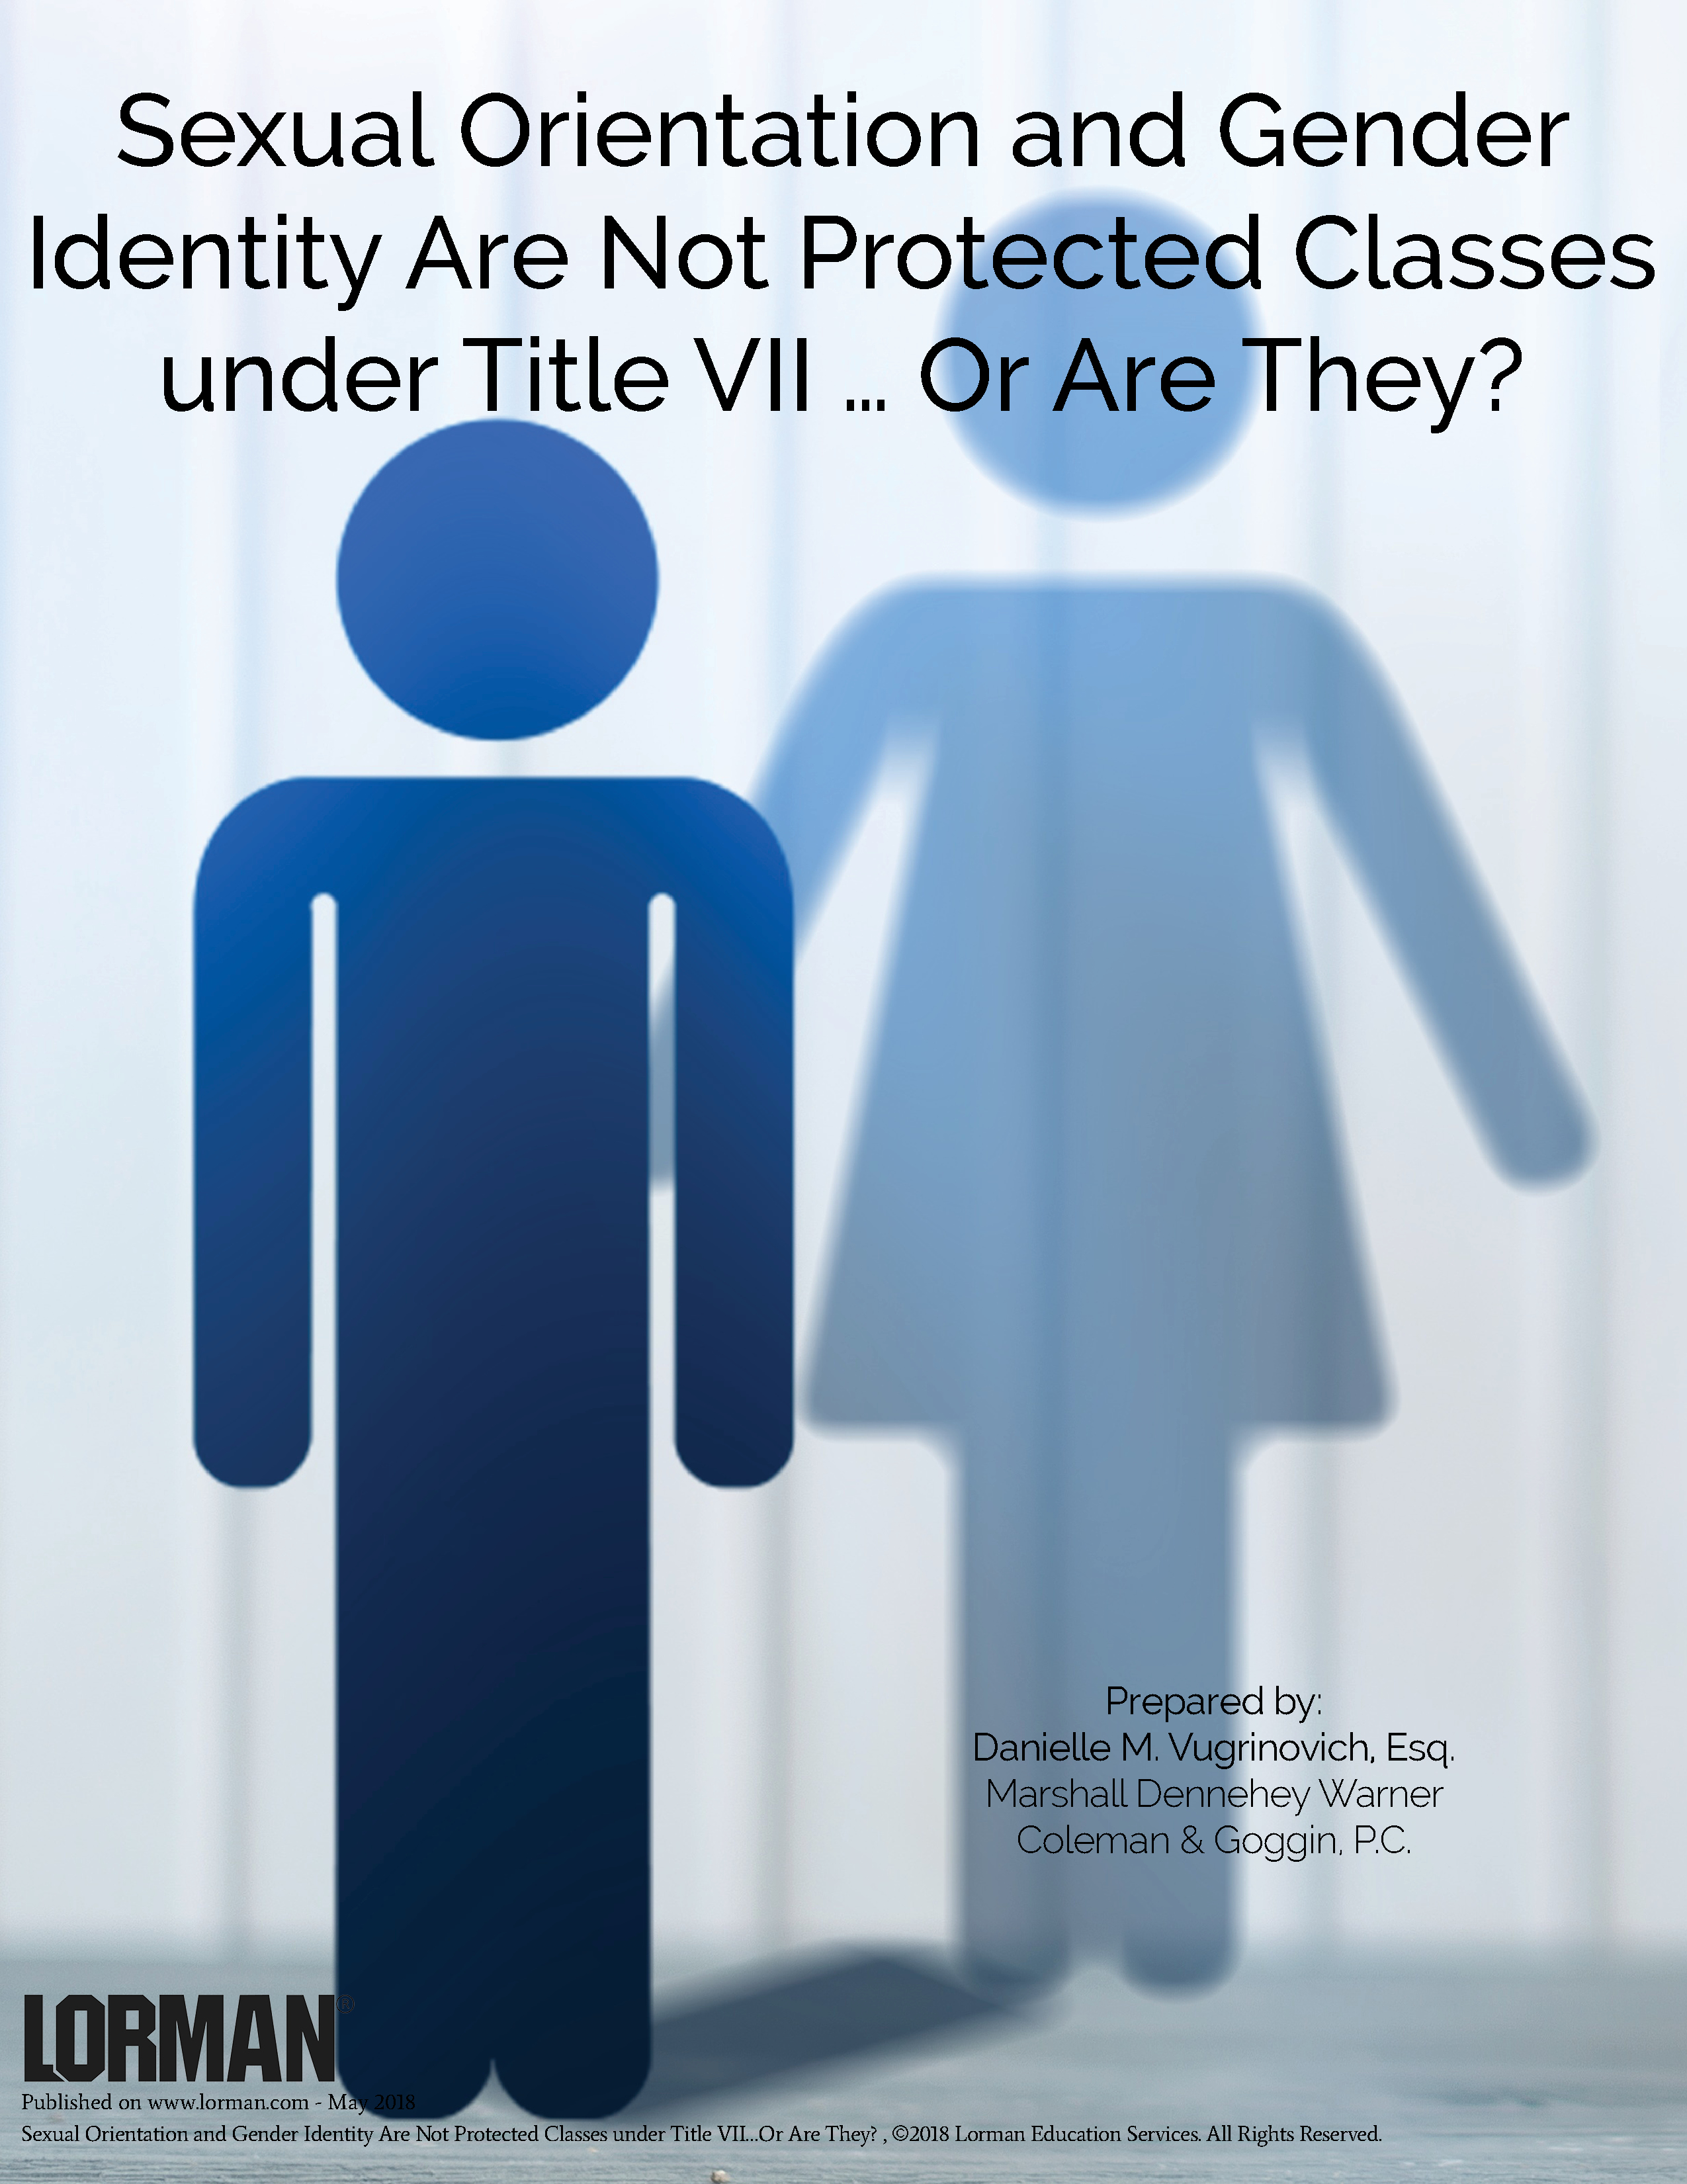 Sexual Orientation and Gender Identity Are Not Protected Classes under Title VII … Or Are They?